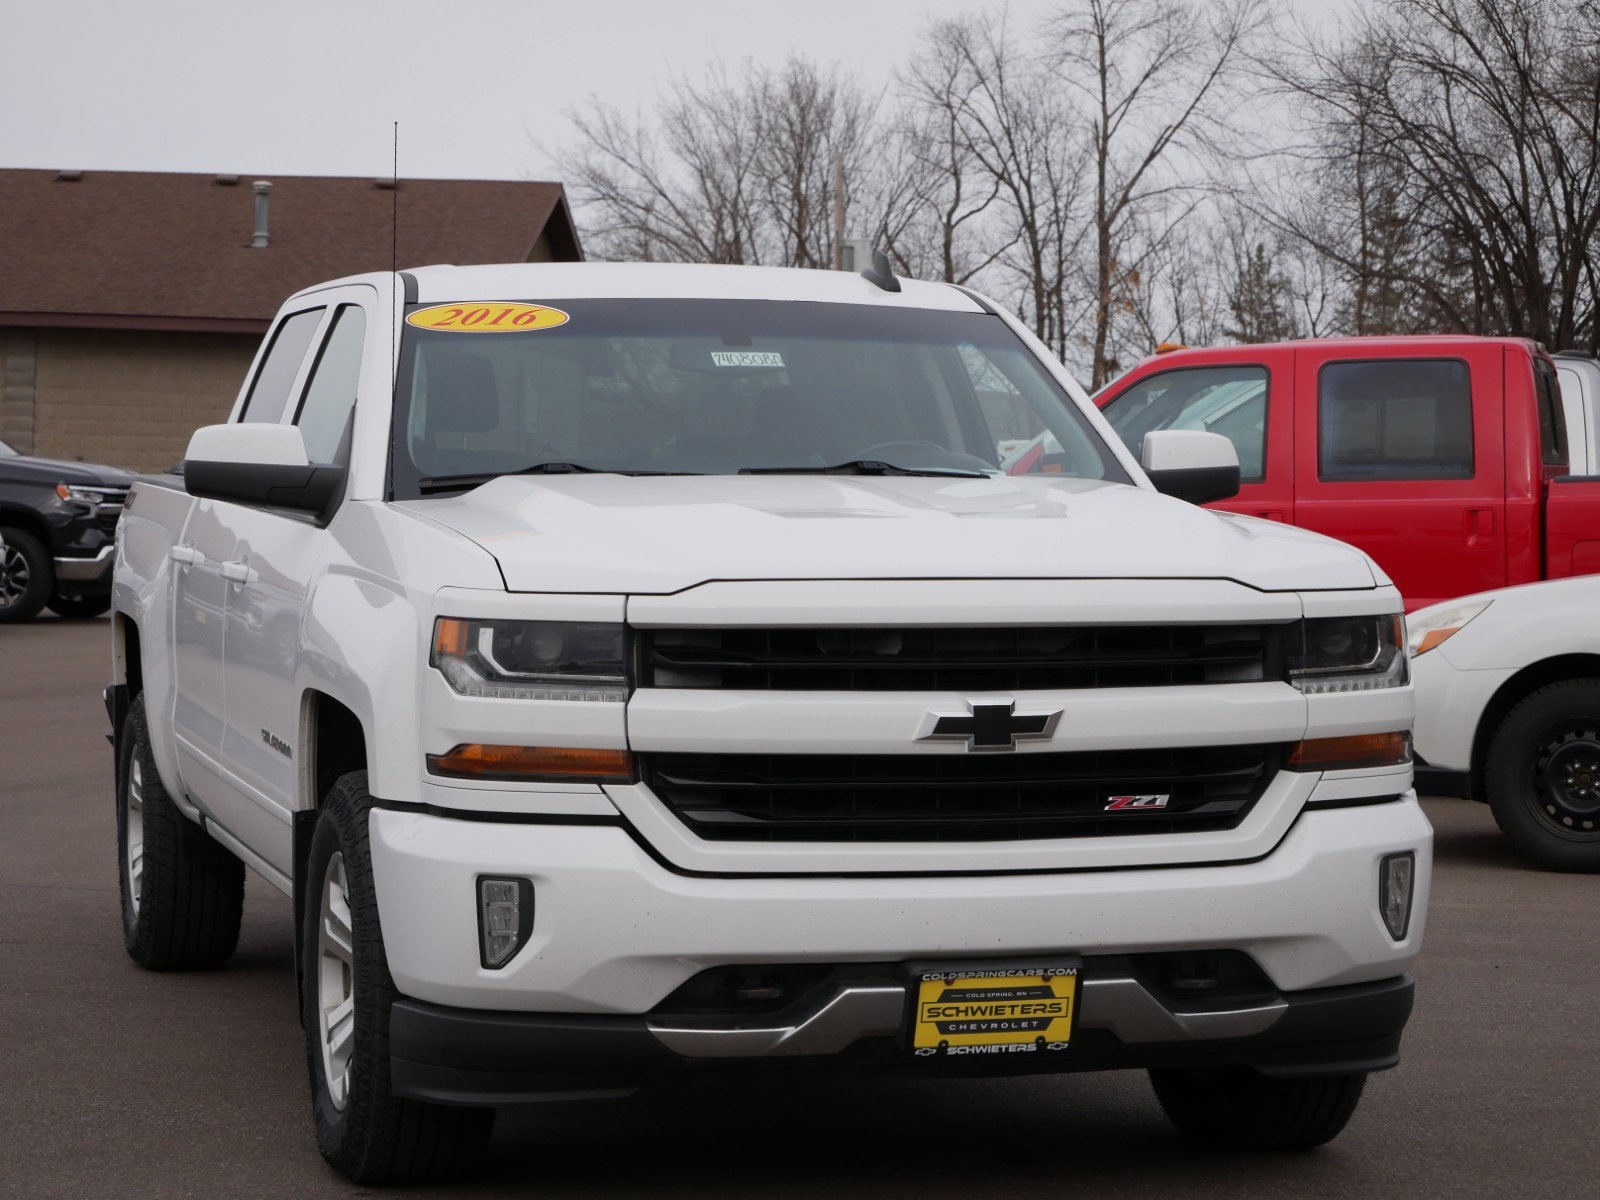 Used 2016 Chevrolet Silverado 1500 LT with VIN 3GCUKREC9GG381369 for sale in Cold Spring, Minnesota